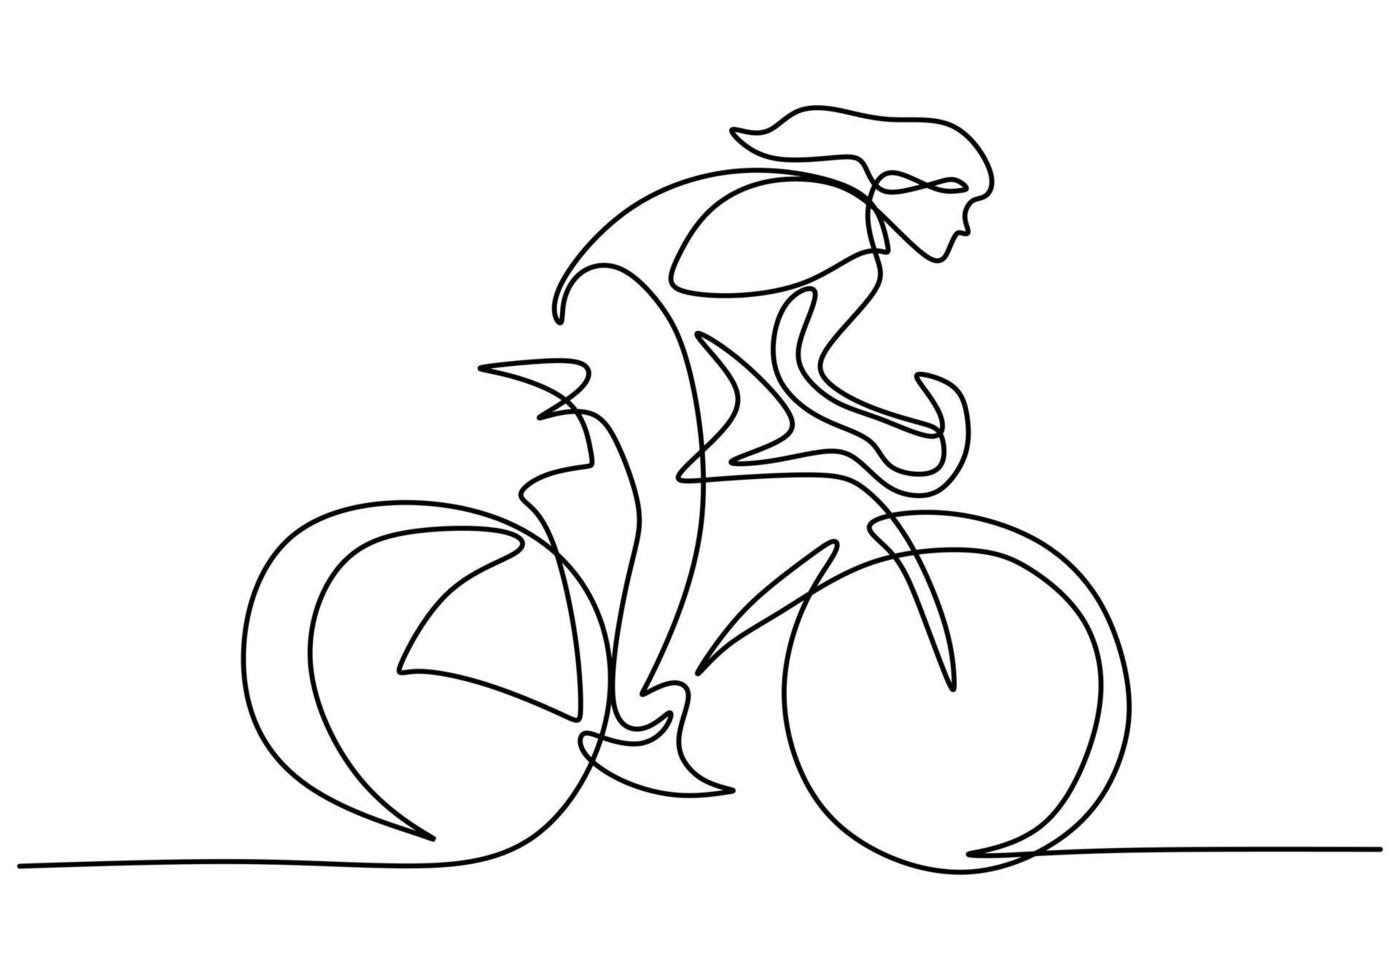 Continuous single line drawing of young girl bicycle racer focus train her skill  on the street vector